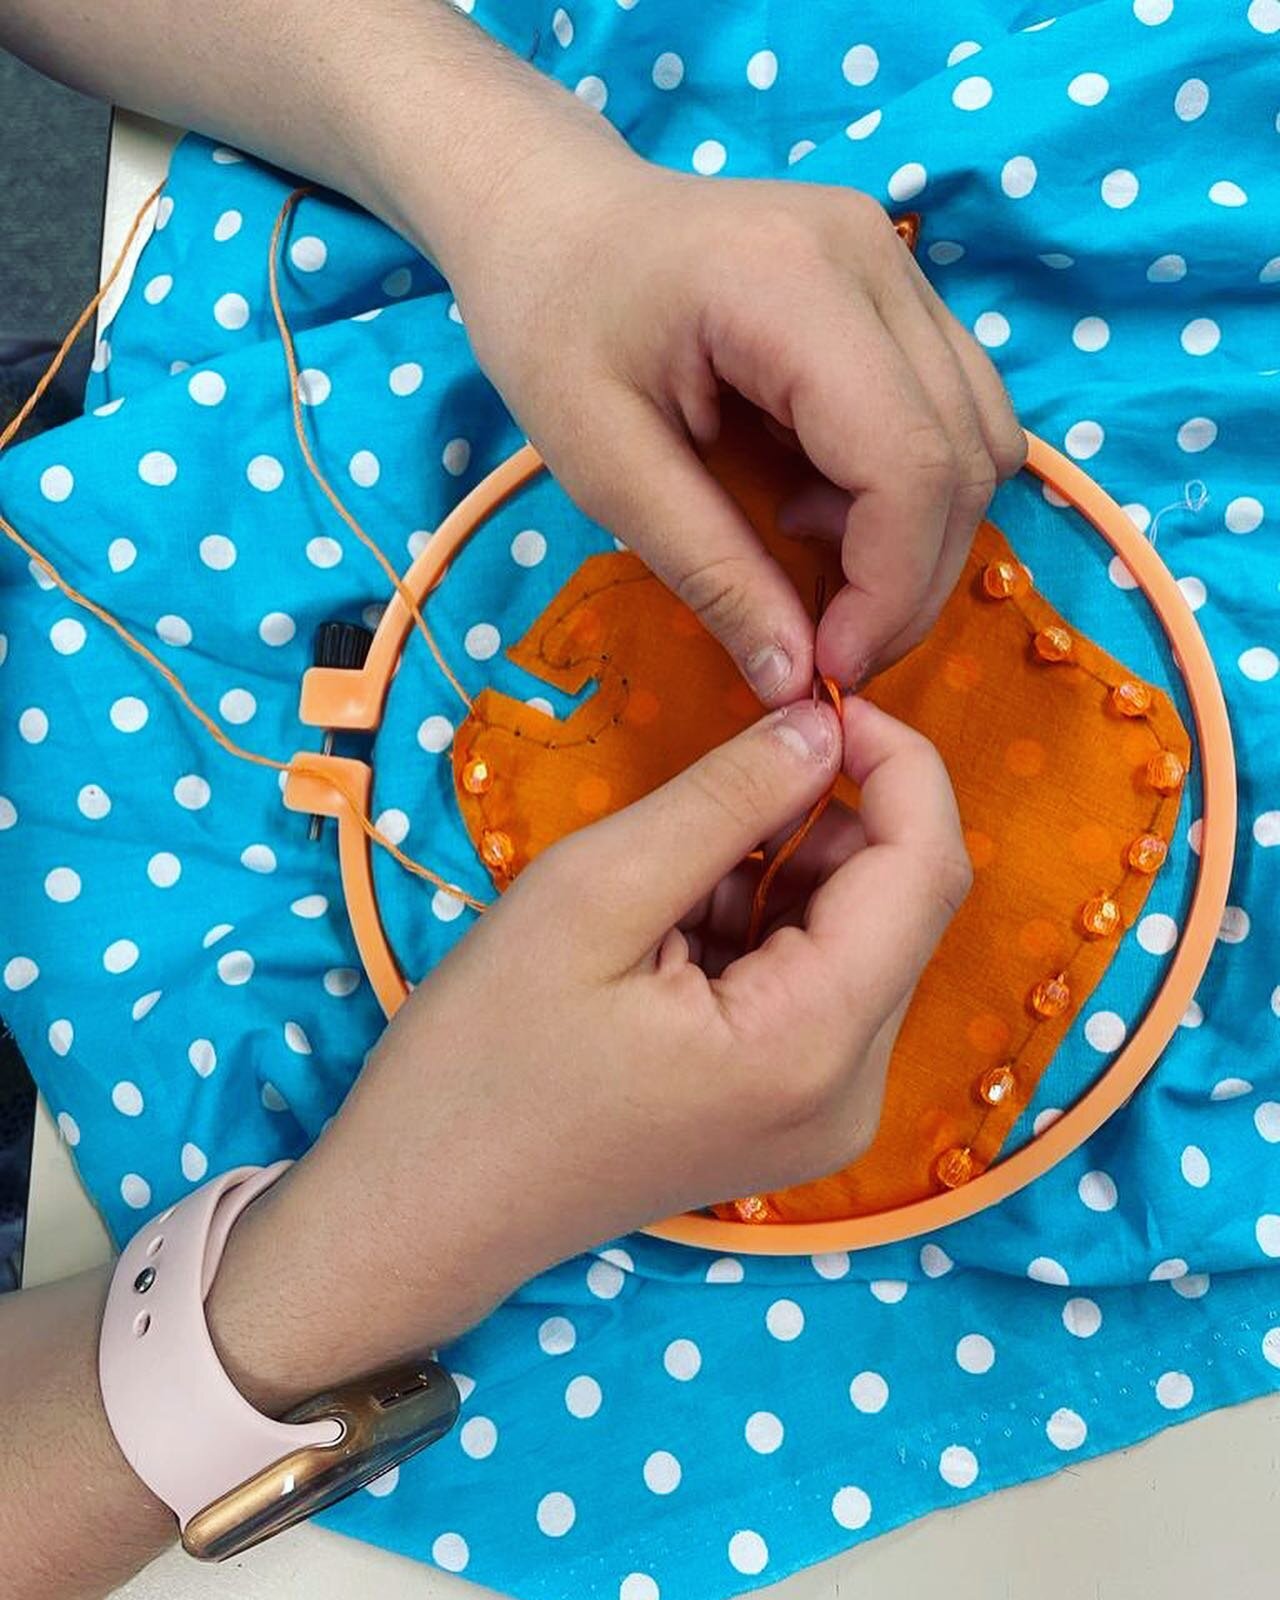 Sew &amp; Co work in progress 💫 A little glimpse into the measuring, beading, hand sewing, tacking and machine sewing from the last few weeks 😍

With less than half a term to go concentration is at its peak for our clever sewers! 👏🏾📏 🪡 🧵 

🌈 